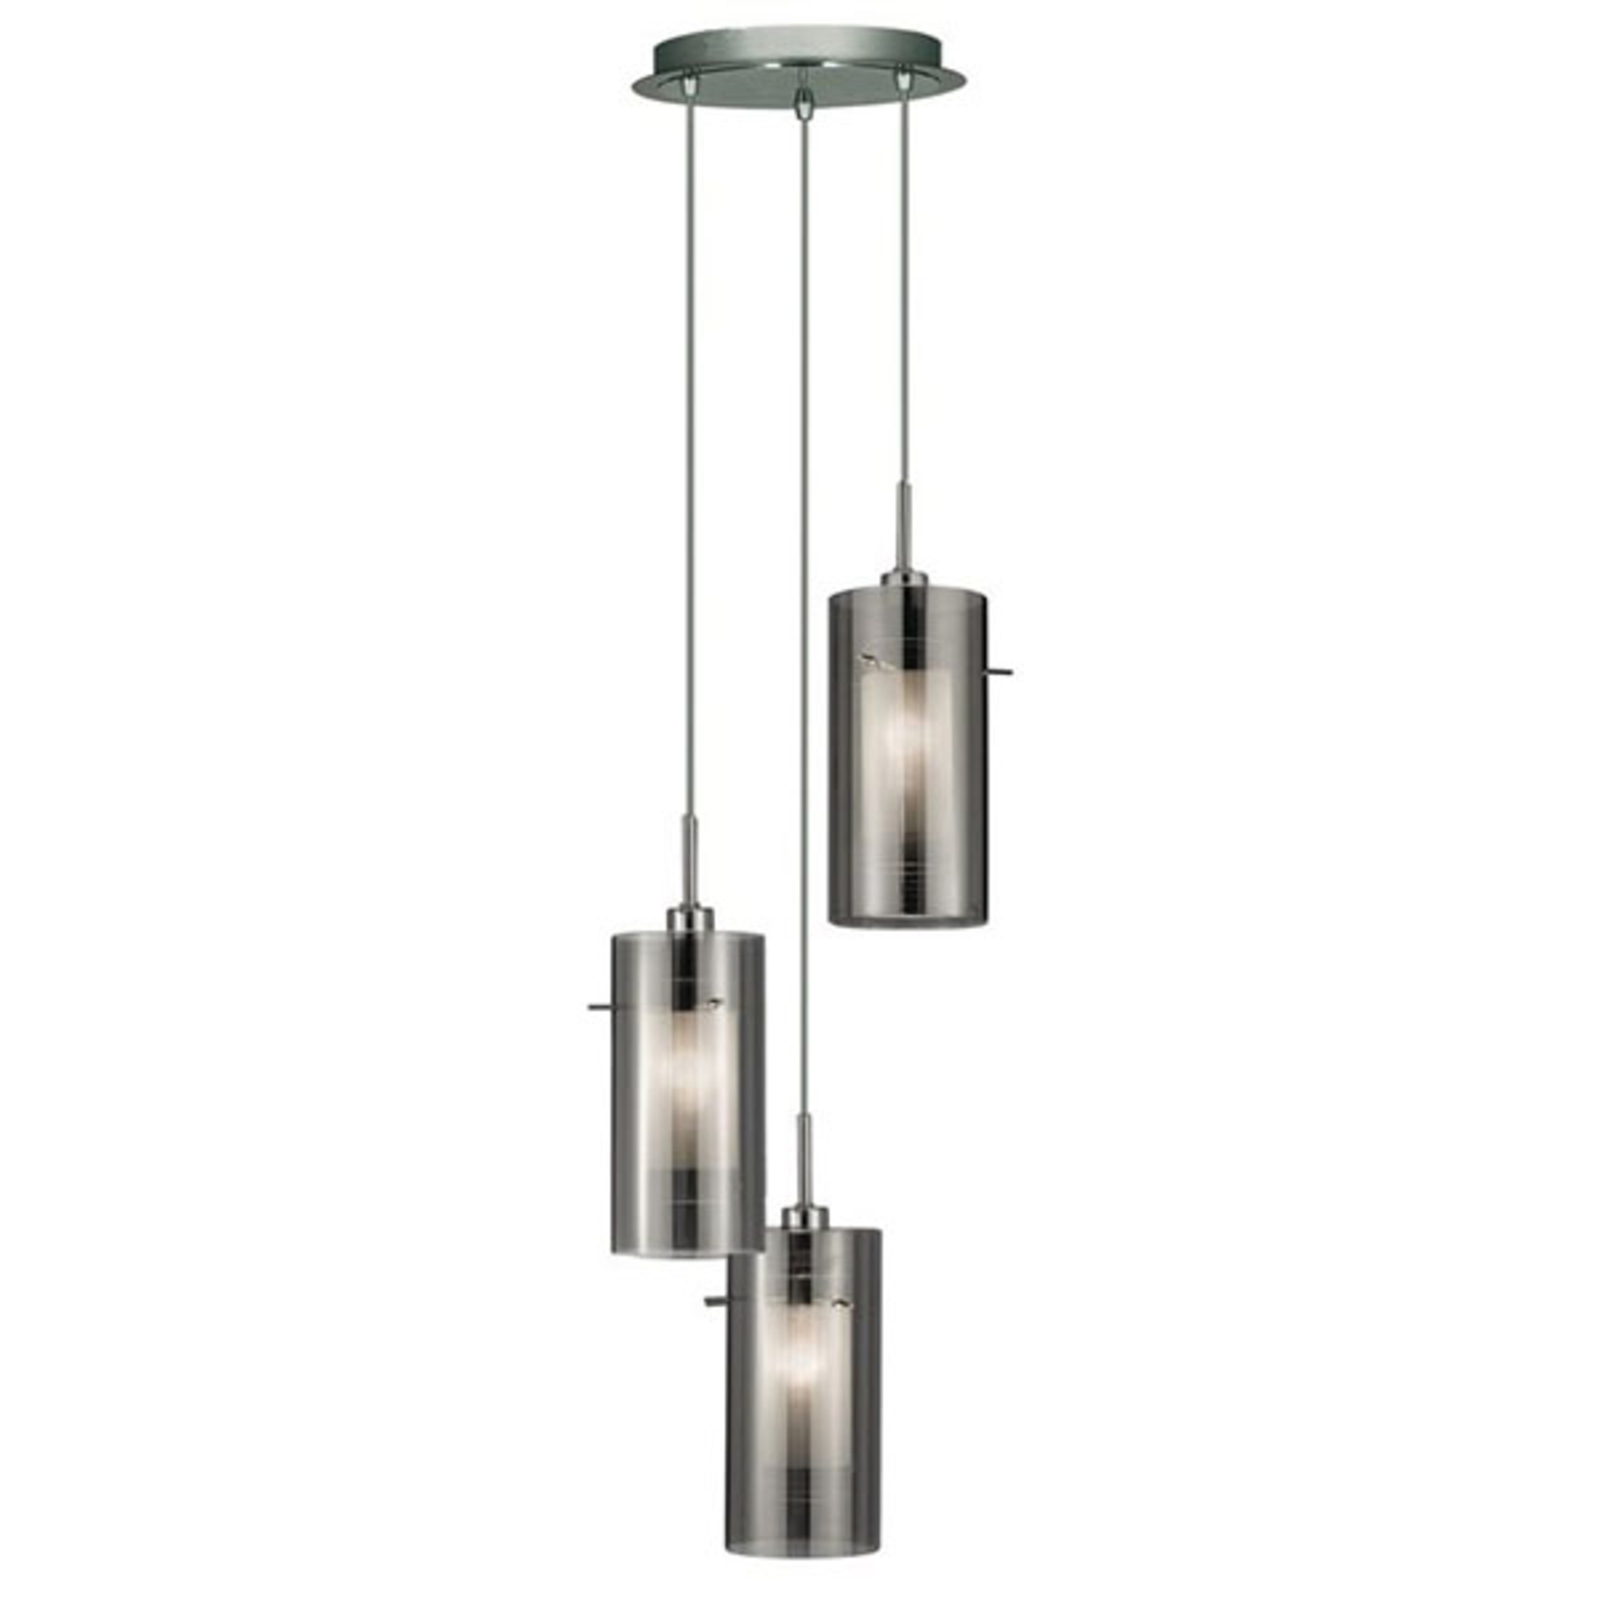 Hanglamp Duo 2 rookglas/chroom rond 3-lamps